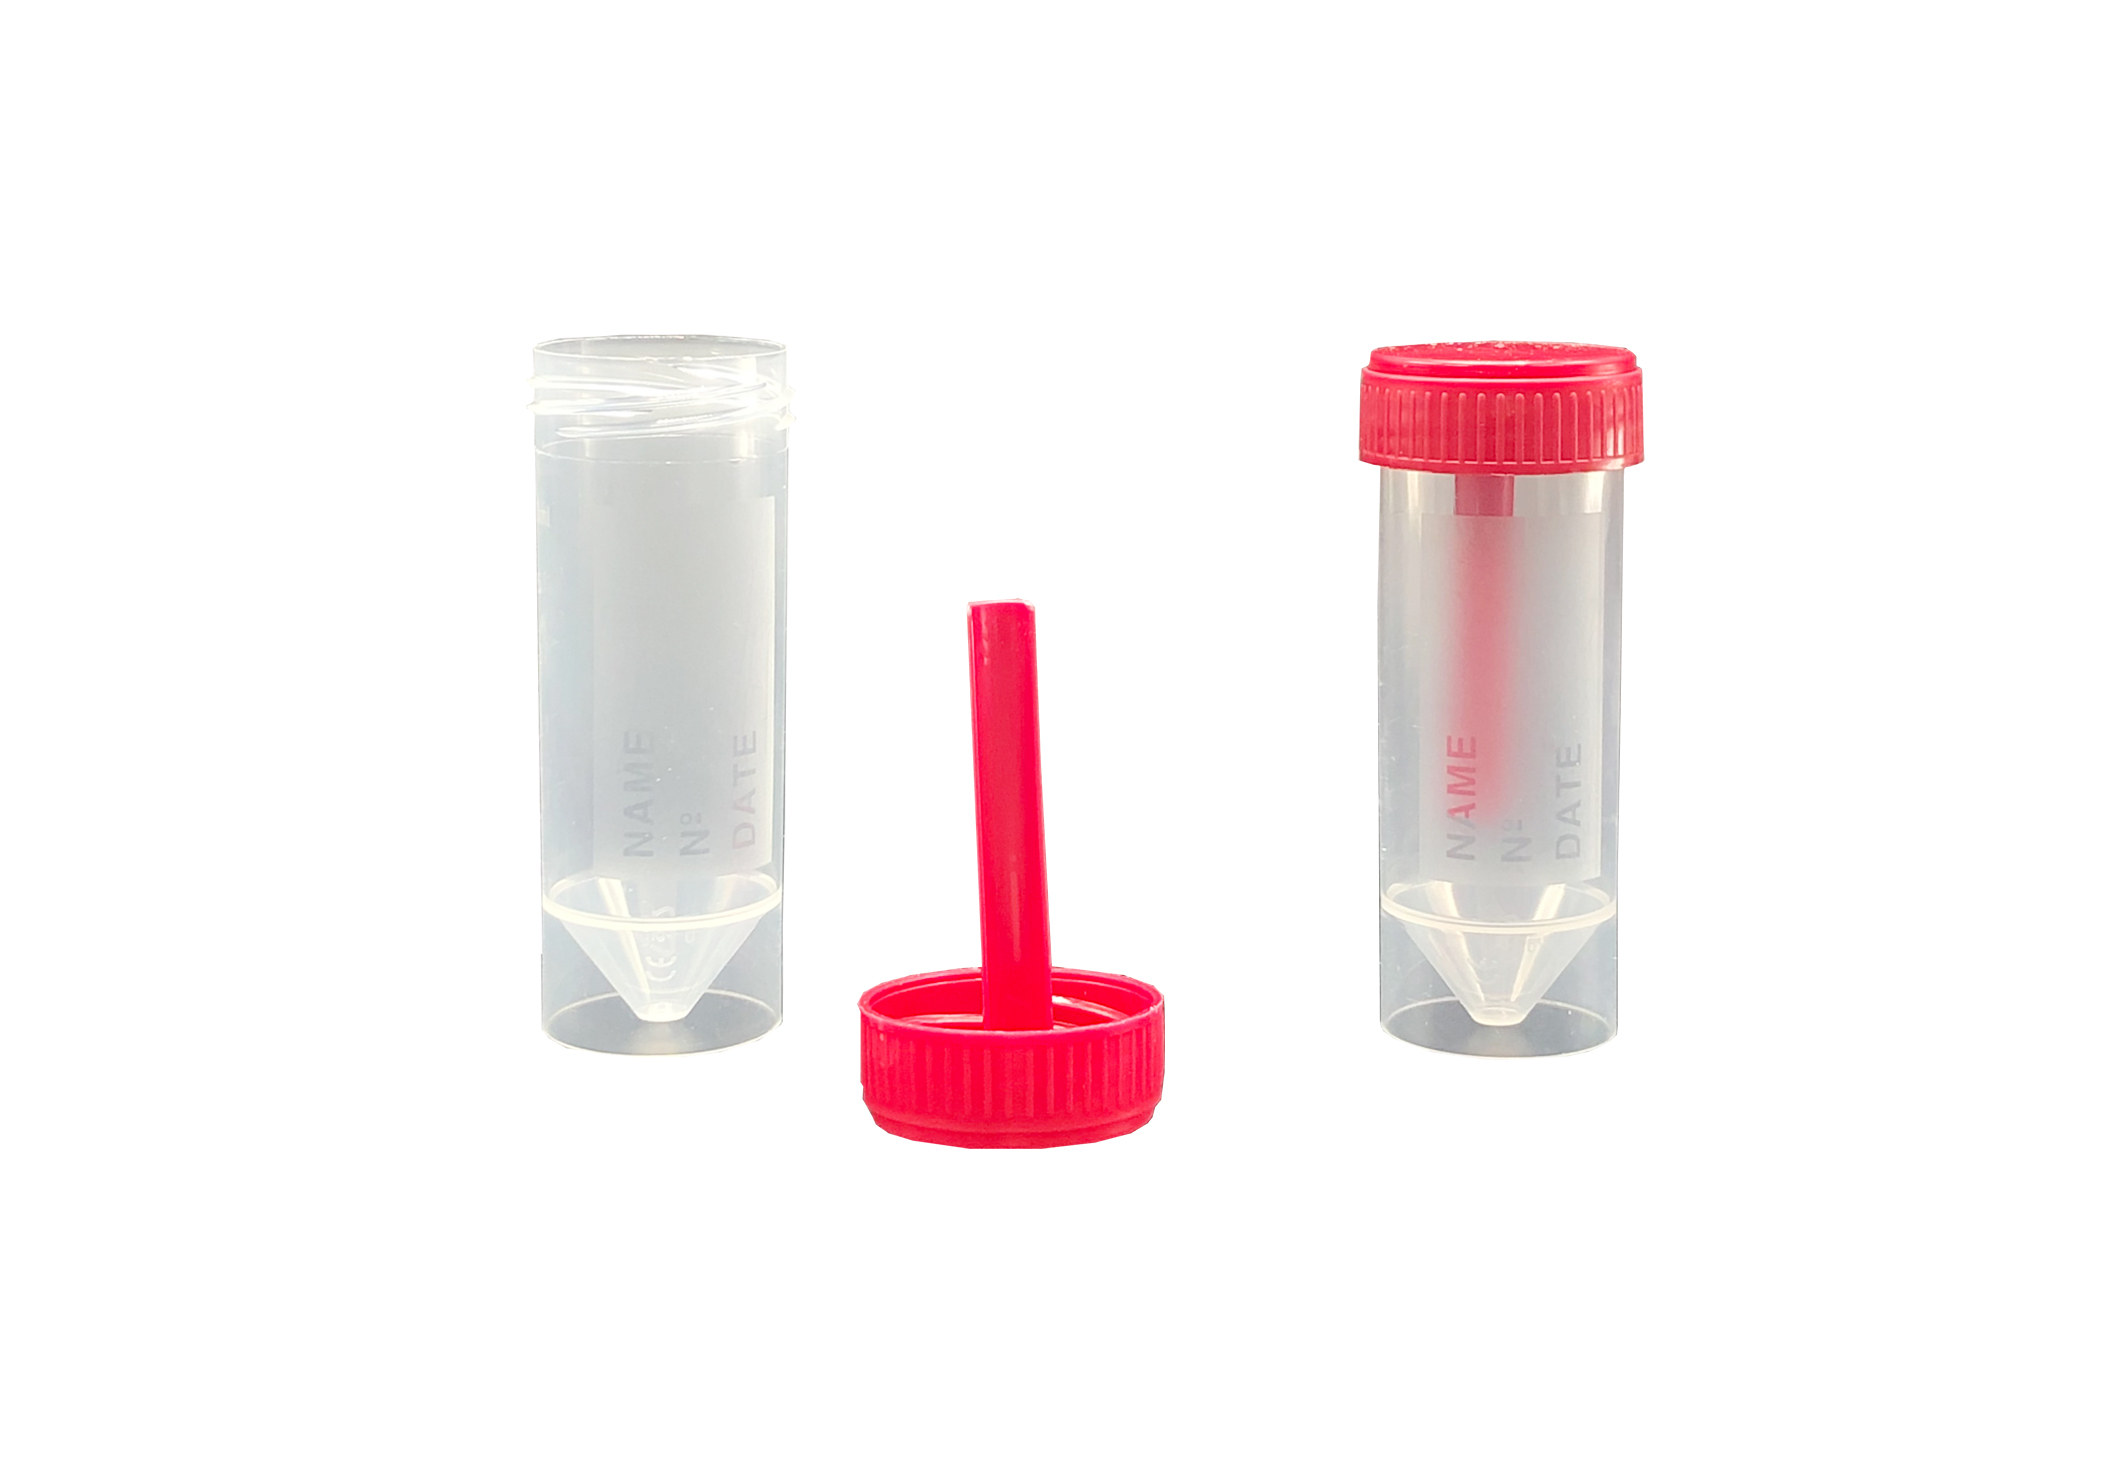 SSC-700 Romed stool sample container 30ml, 700 pcs in a carton.